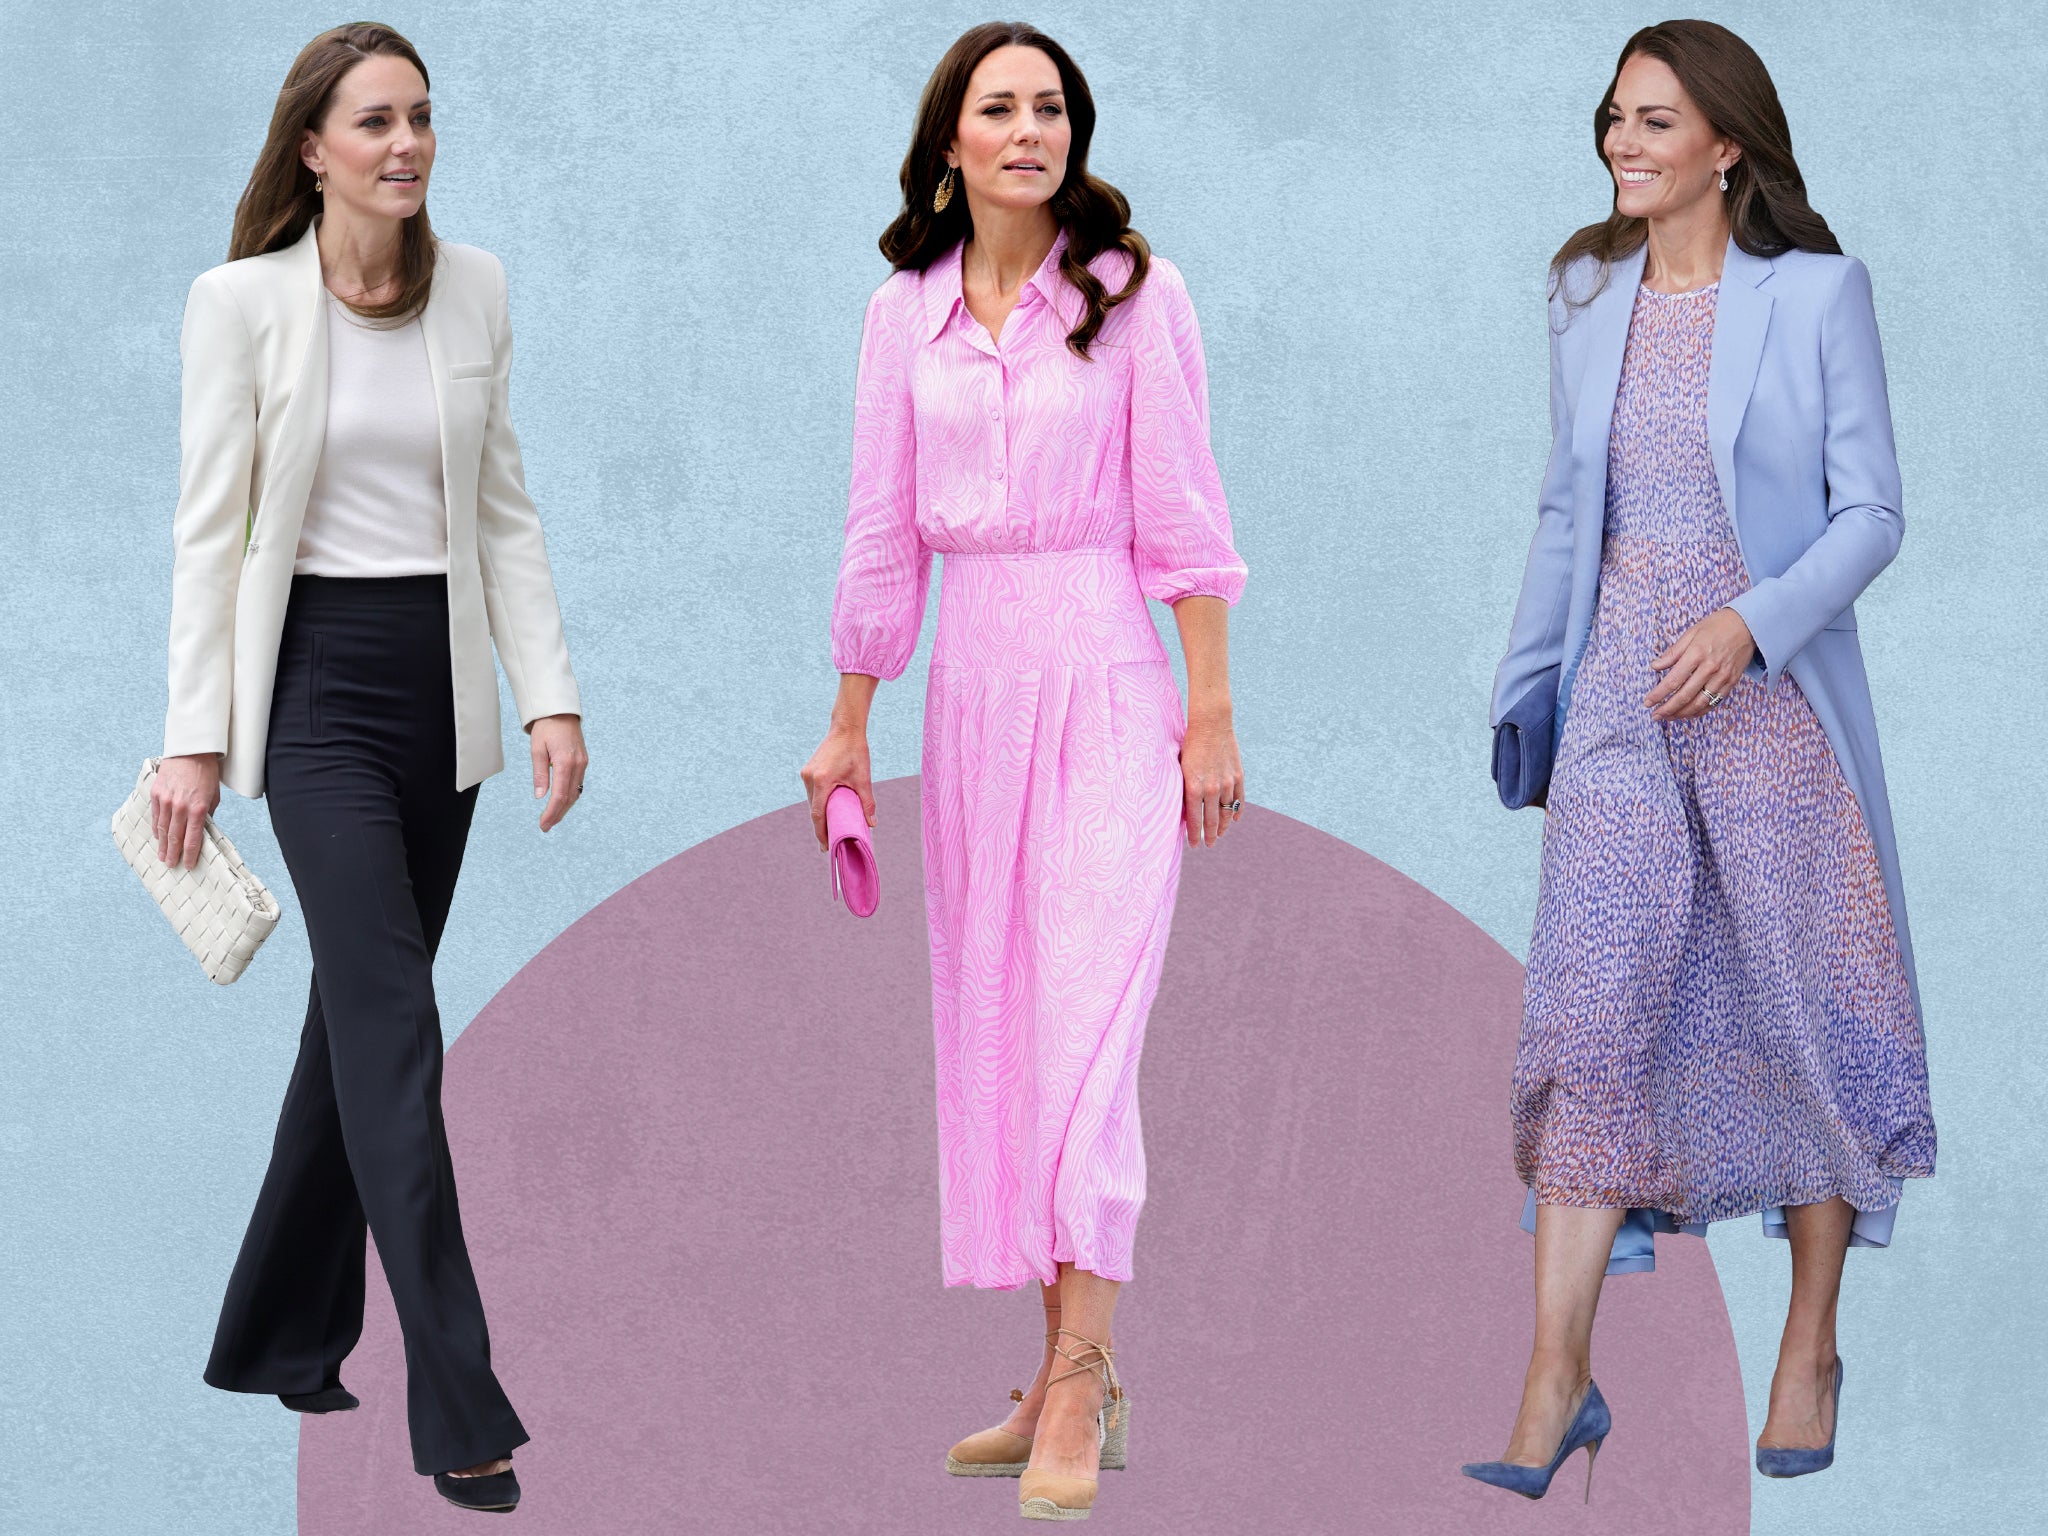 From feminine dresses to smart blazers, Kate’s outfits always inspire